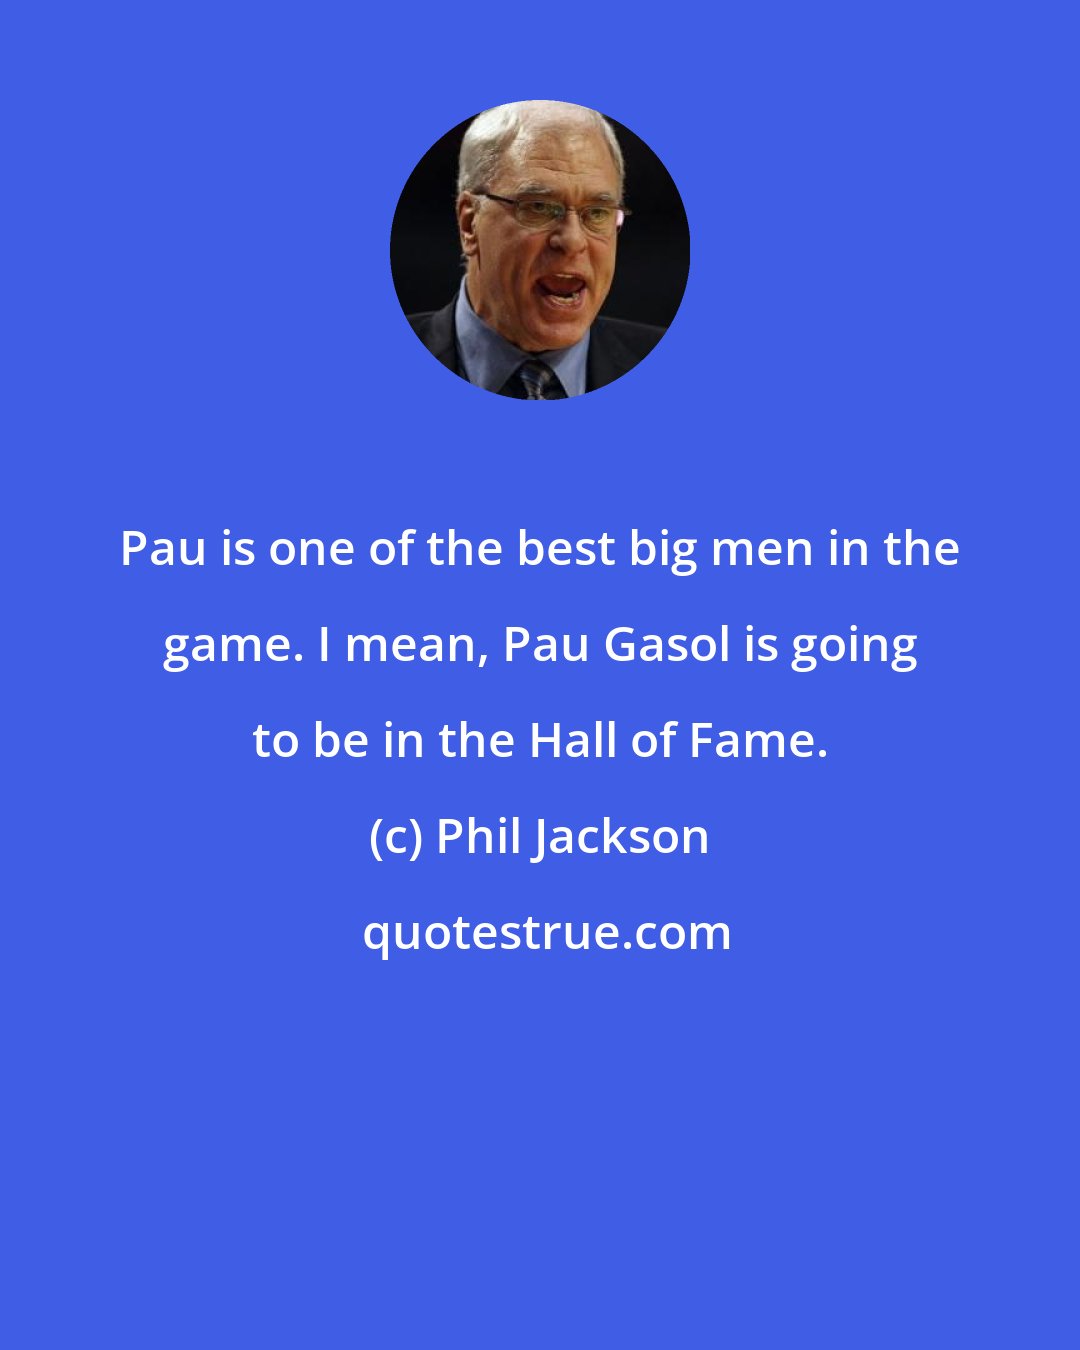 Phil Jackson: Pau is one of the best big men in the game. I mean, Pau Gasol is going to be in the Hall of Fame.